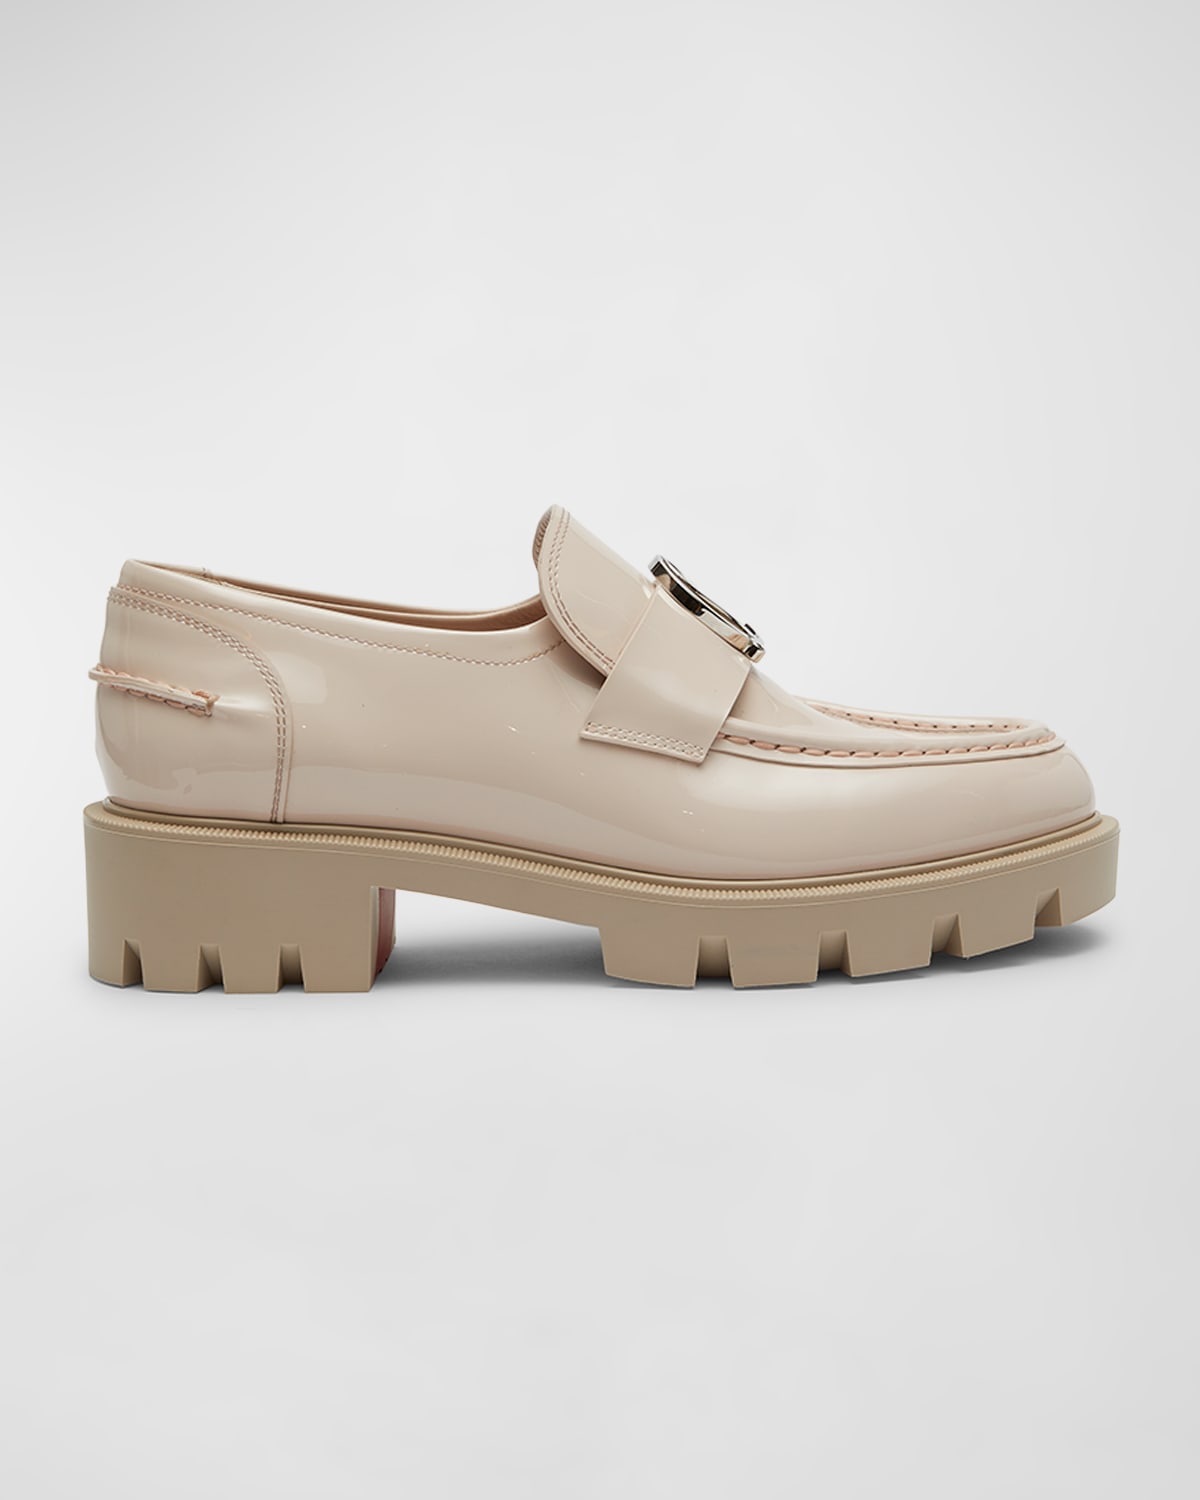 Christian Louboutin LOCK ME ME MOC Turnlock Leather Loafer Flat